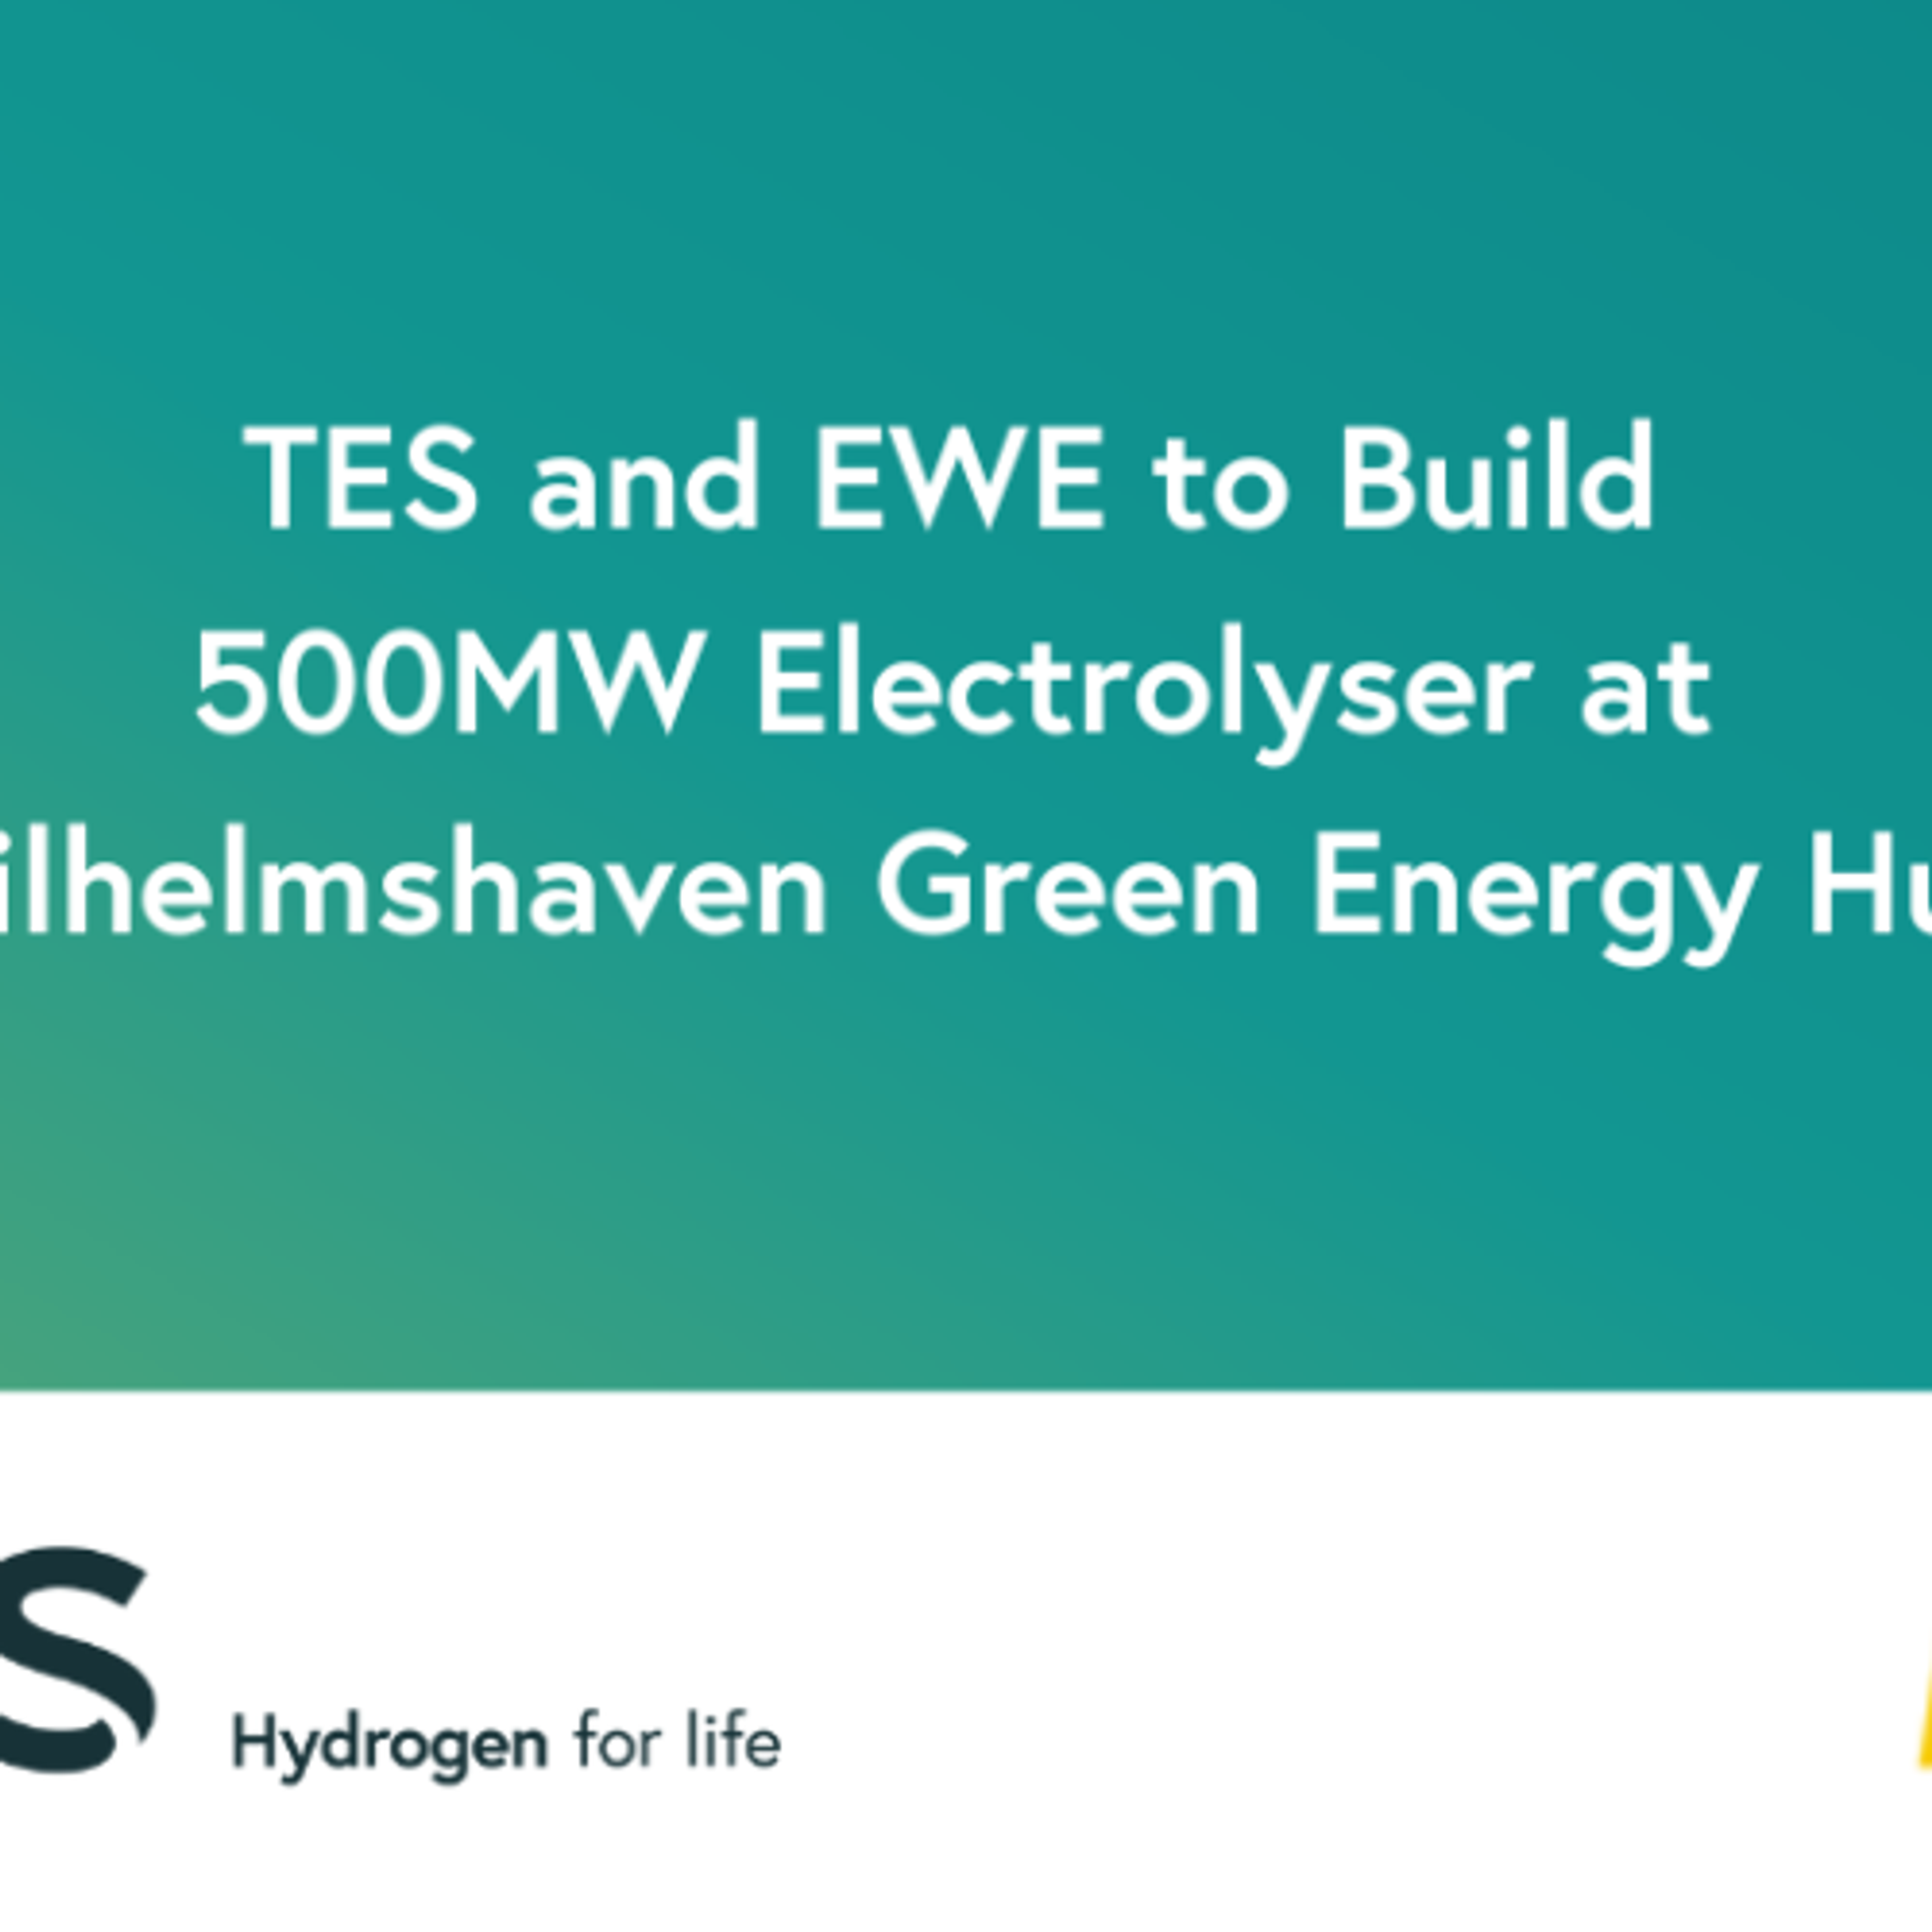 TES and EWE to Build 500MW Electrolyser at Wilhelmshaven Green Energy Hub